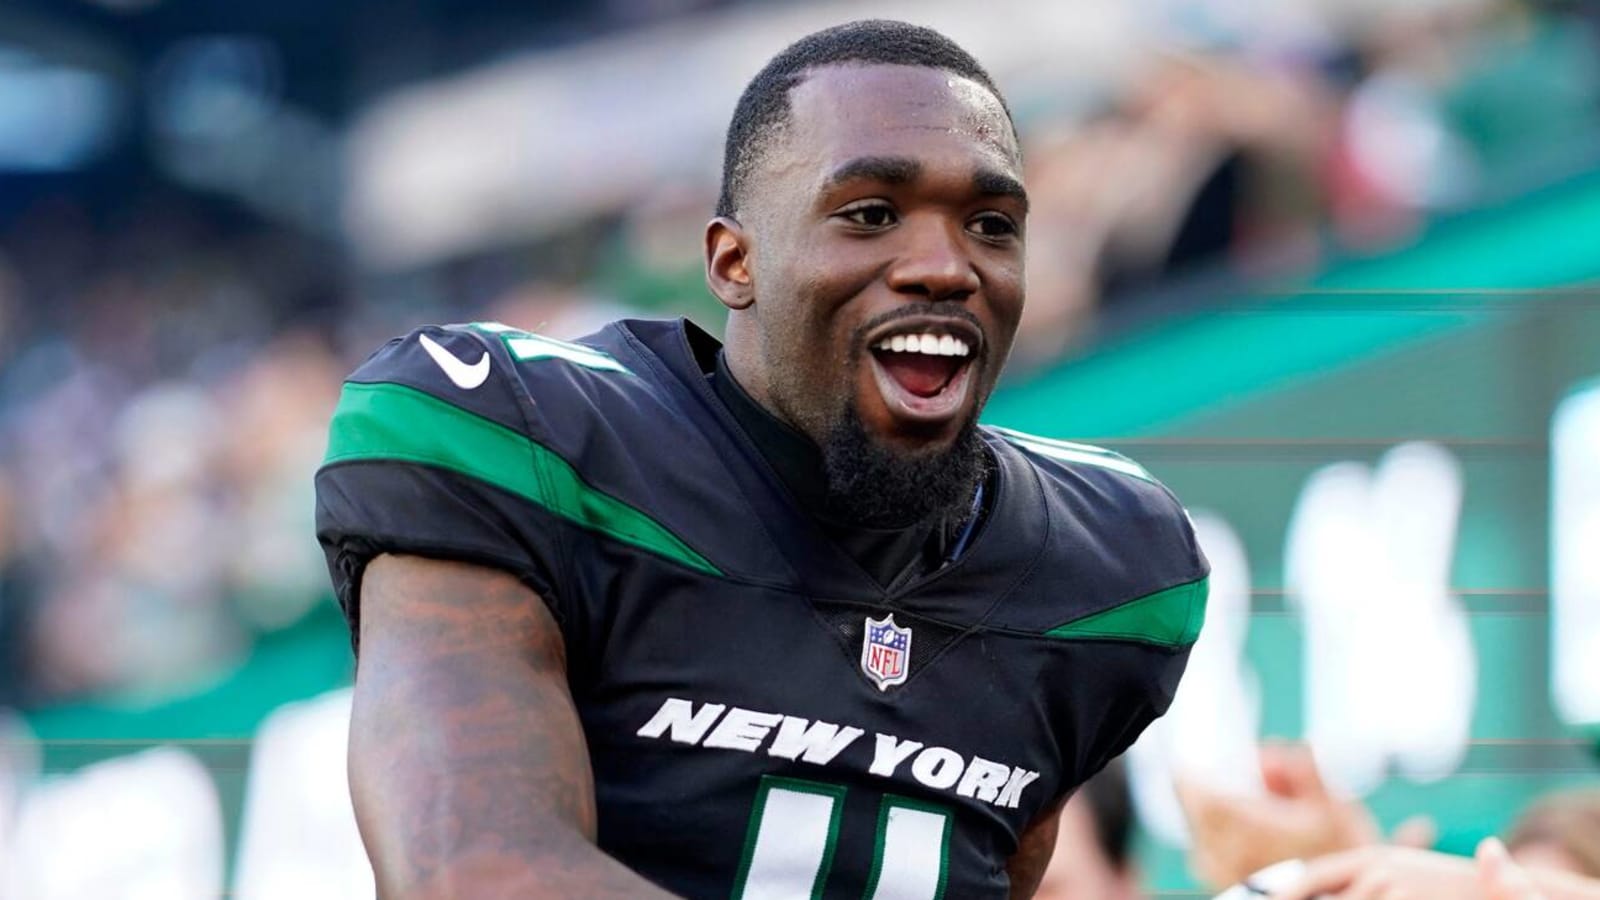 Jets send wide receiver Denzel Mims to the Lions in a trade that